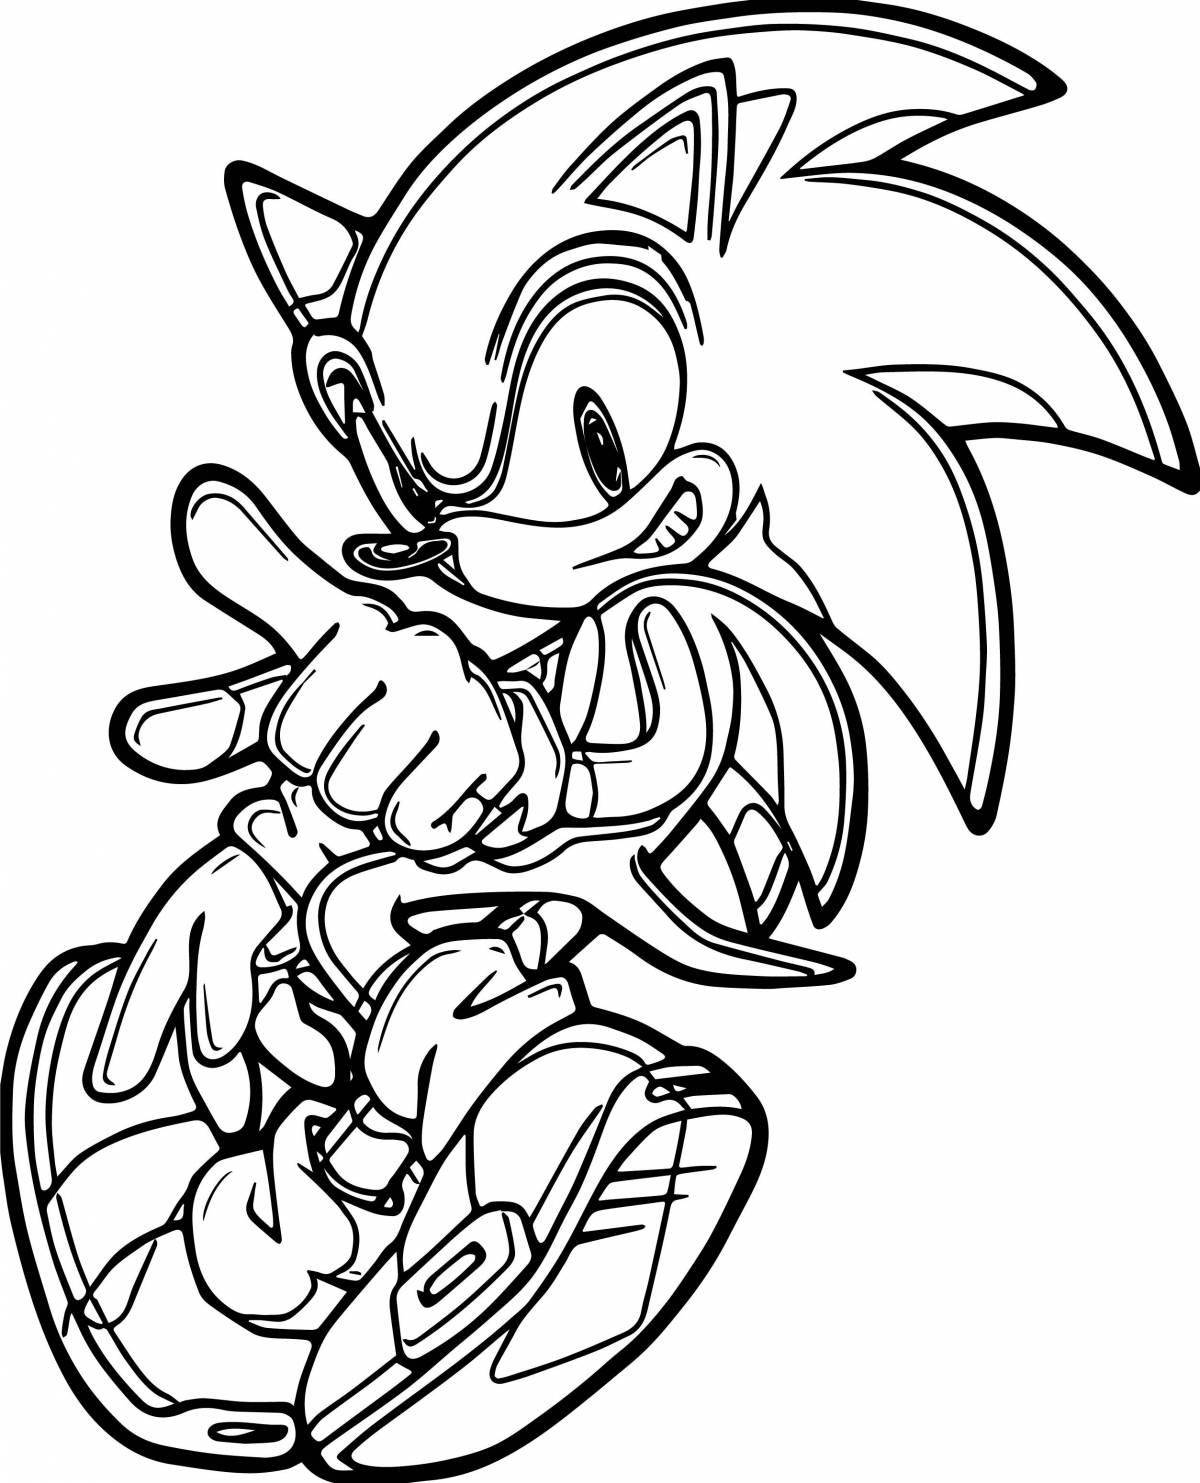 Exciting sonic shadow coloring book